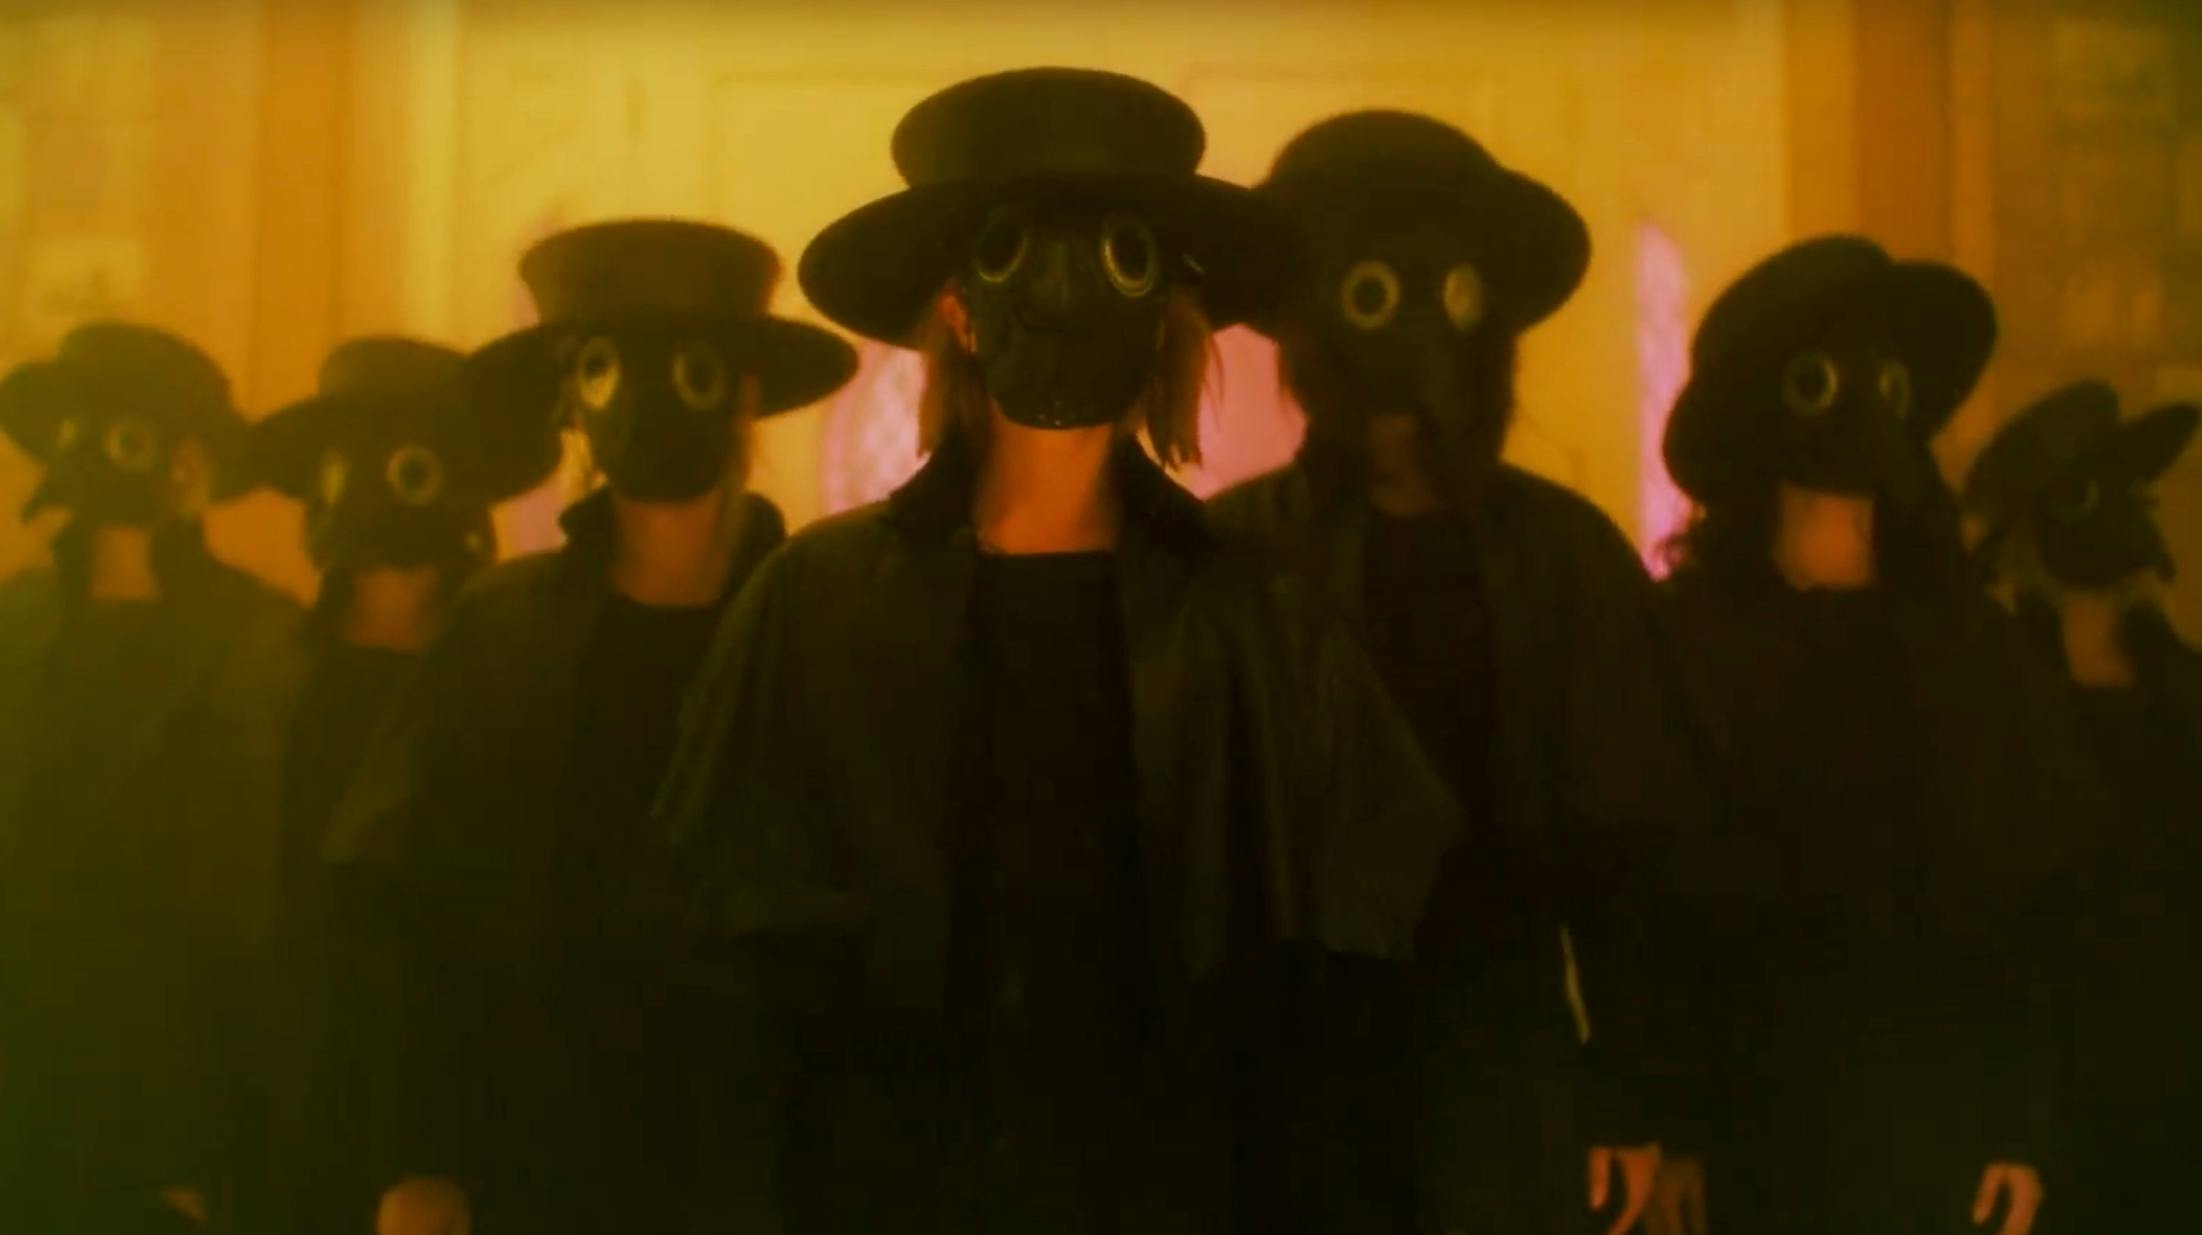 Watch Ghost's Video For Dance Macabre